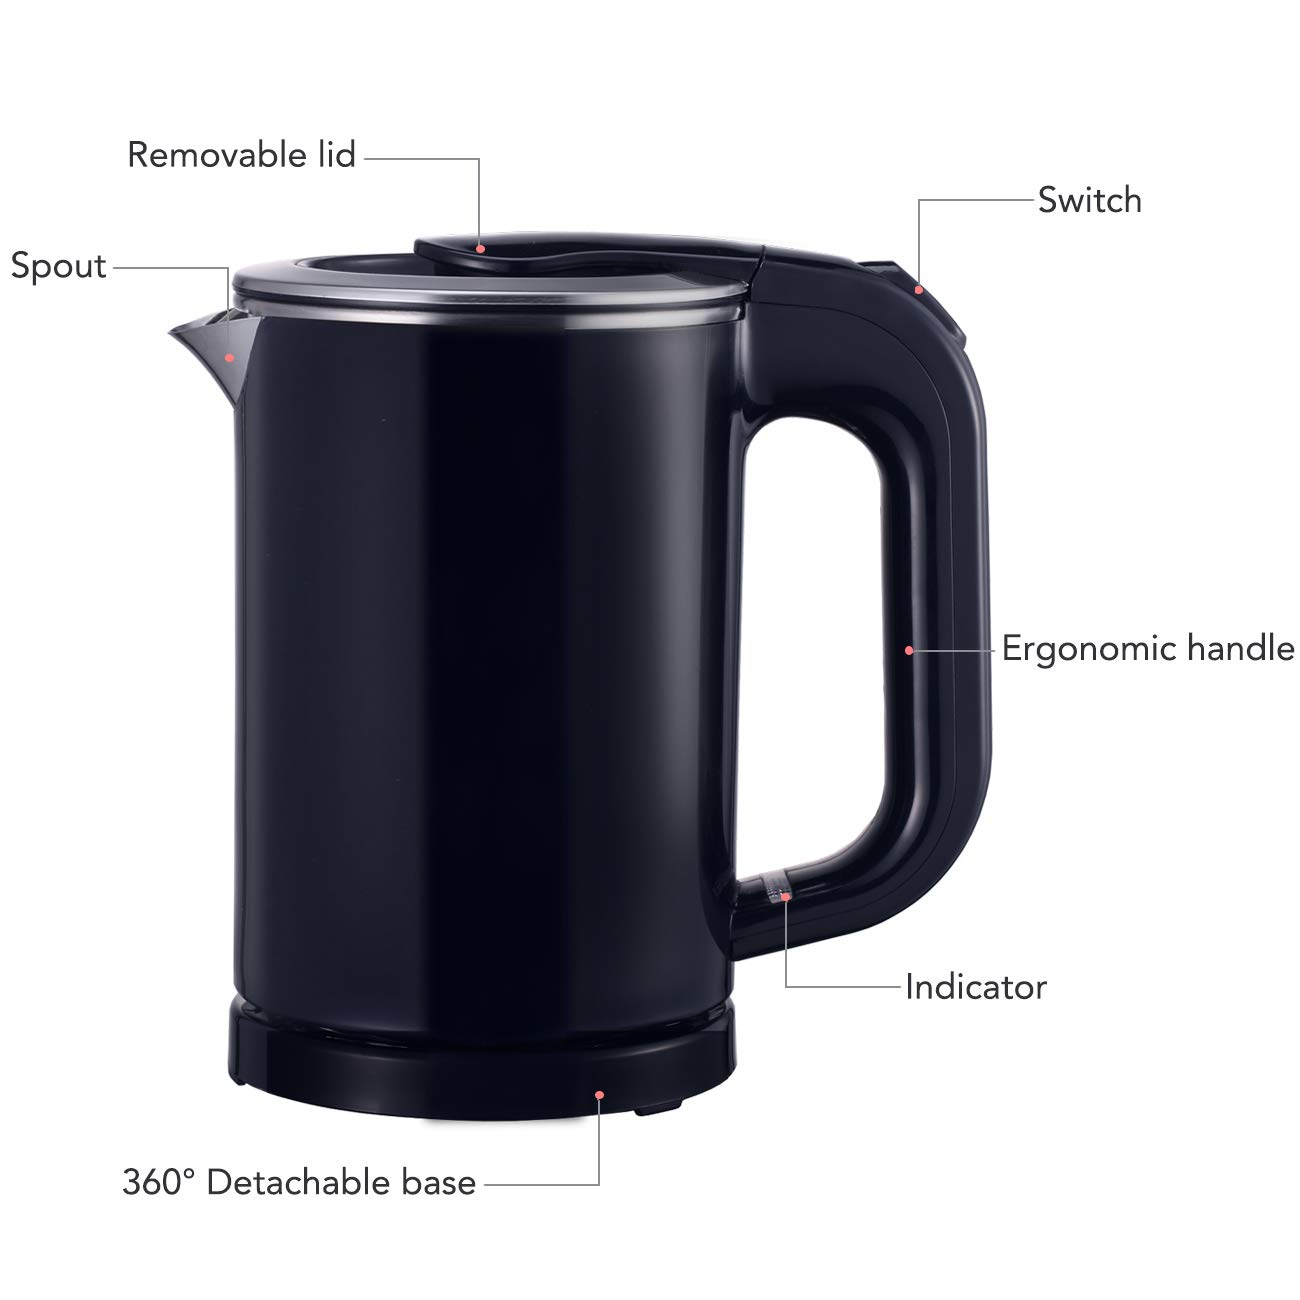 Eglaf 0.5L Small Electric Kettle - Portable Mini Stainless Steel Travel Kettle - Water Touch Inner Surface without Plastic & Cool Touch Outer Surface (Dark blue)